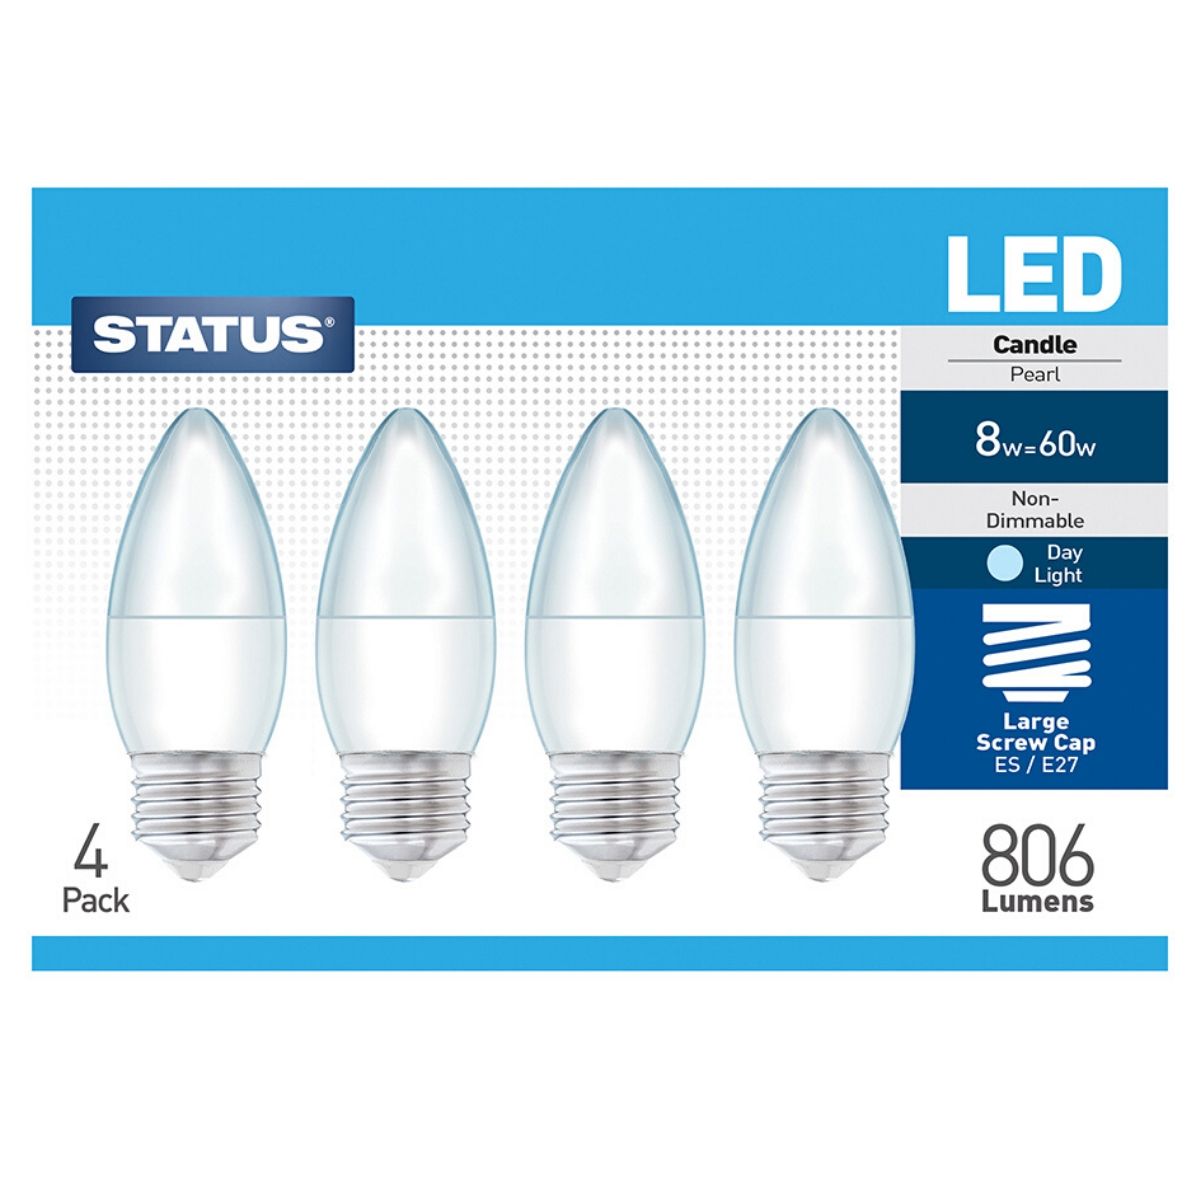 View 4 x Cool White E27 LED Candle Bulbs 8w information